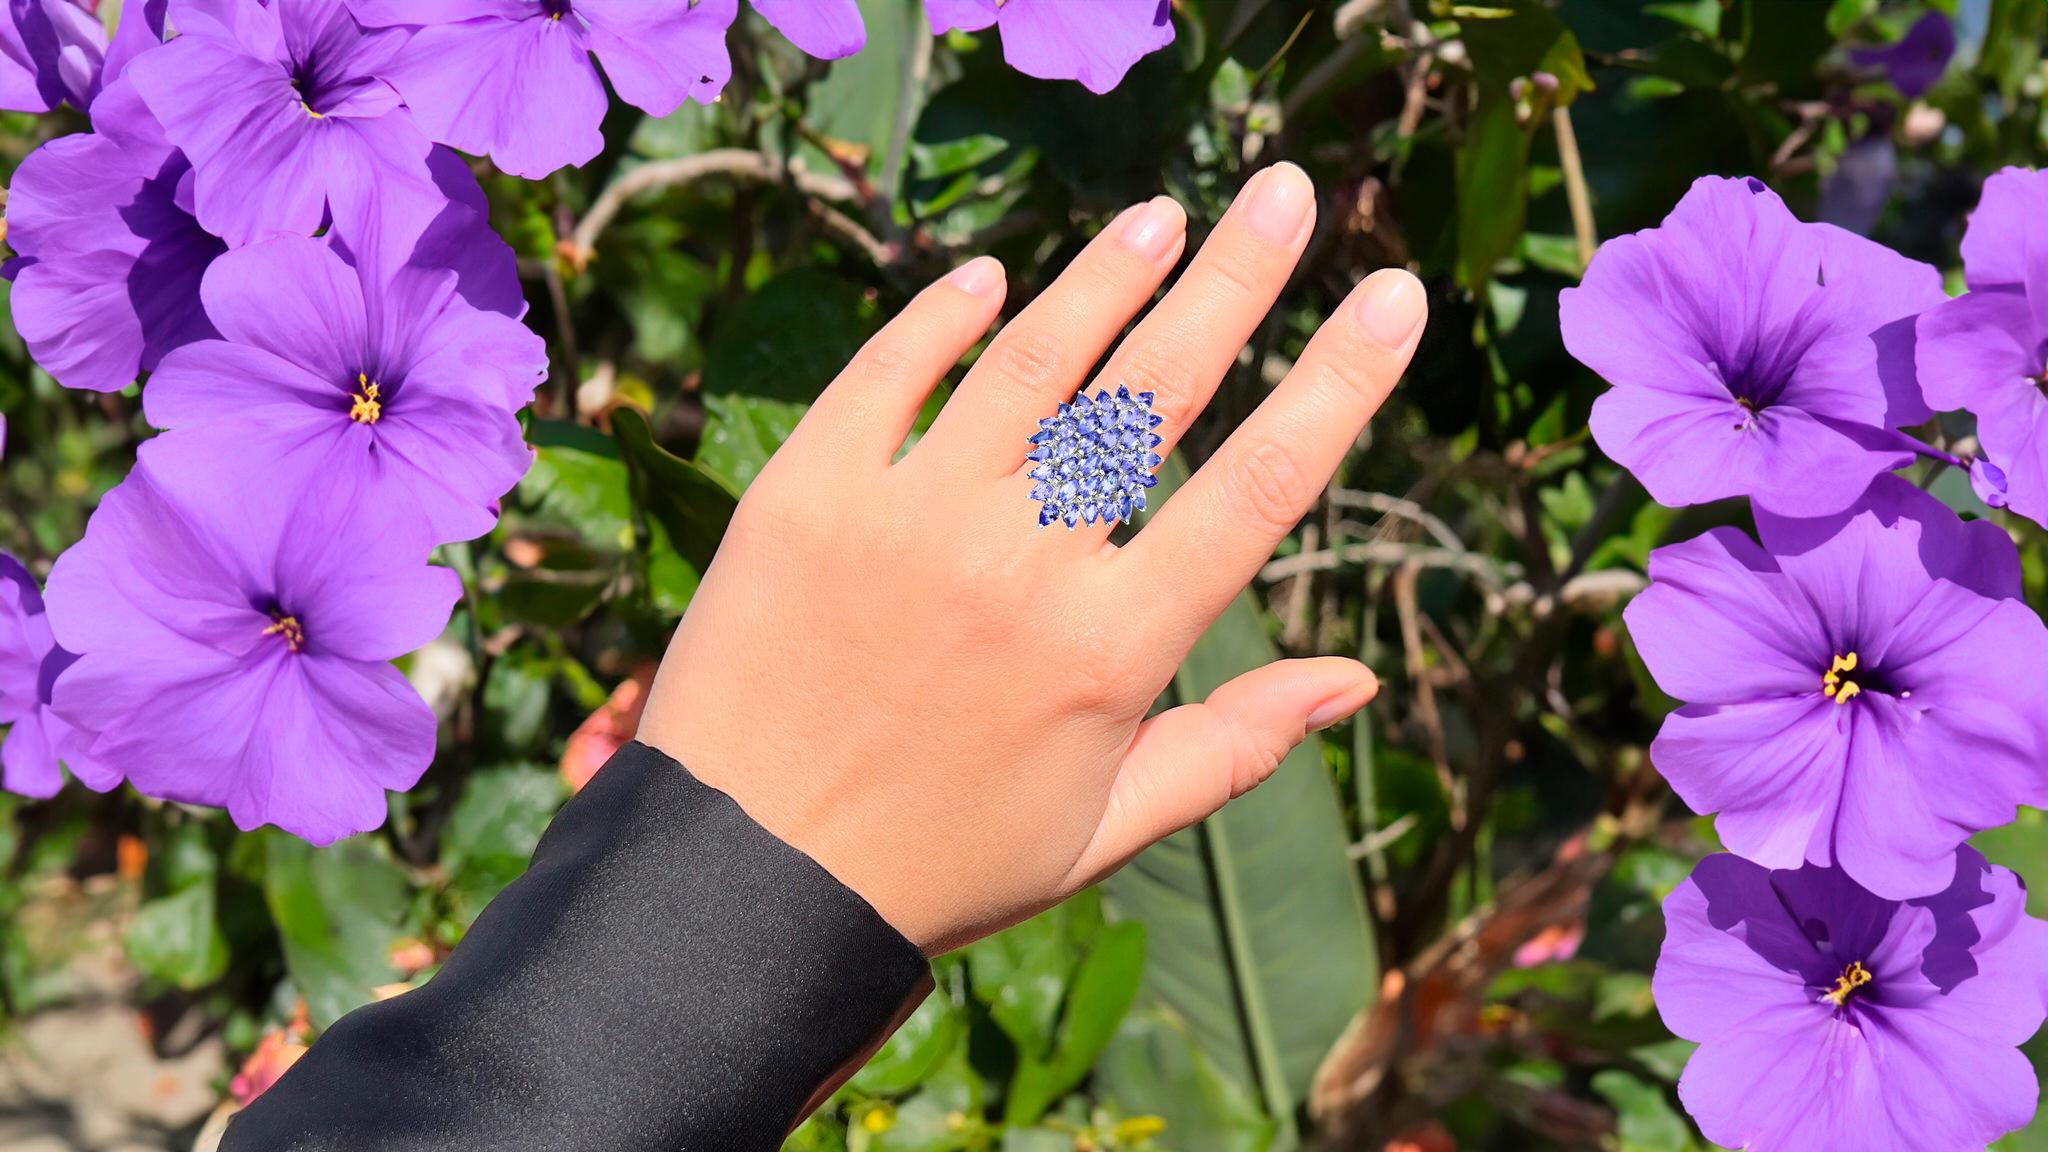 It comes with the Gemological Appraisal by GIA GG/AJP
All Gemstones are Natural
36 Tanzanites = 5.05 Carats
Cut: Marquise, Pear
Metal: Rhodium Plated Sterling Silver
Ring Size: 7* US
*It can be resized complimentary